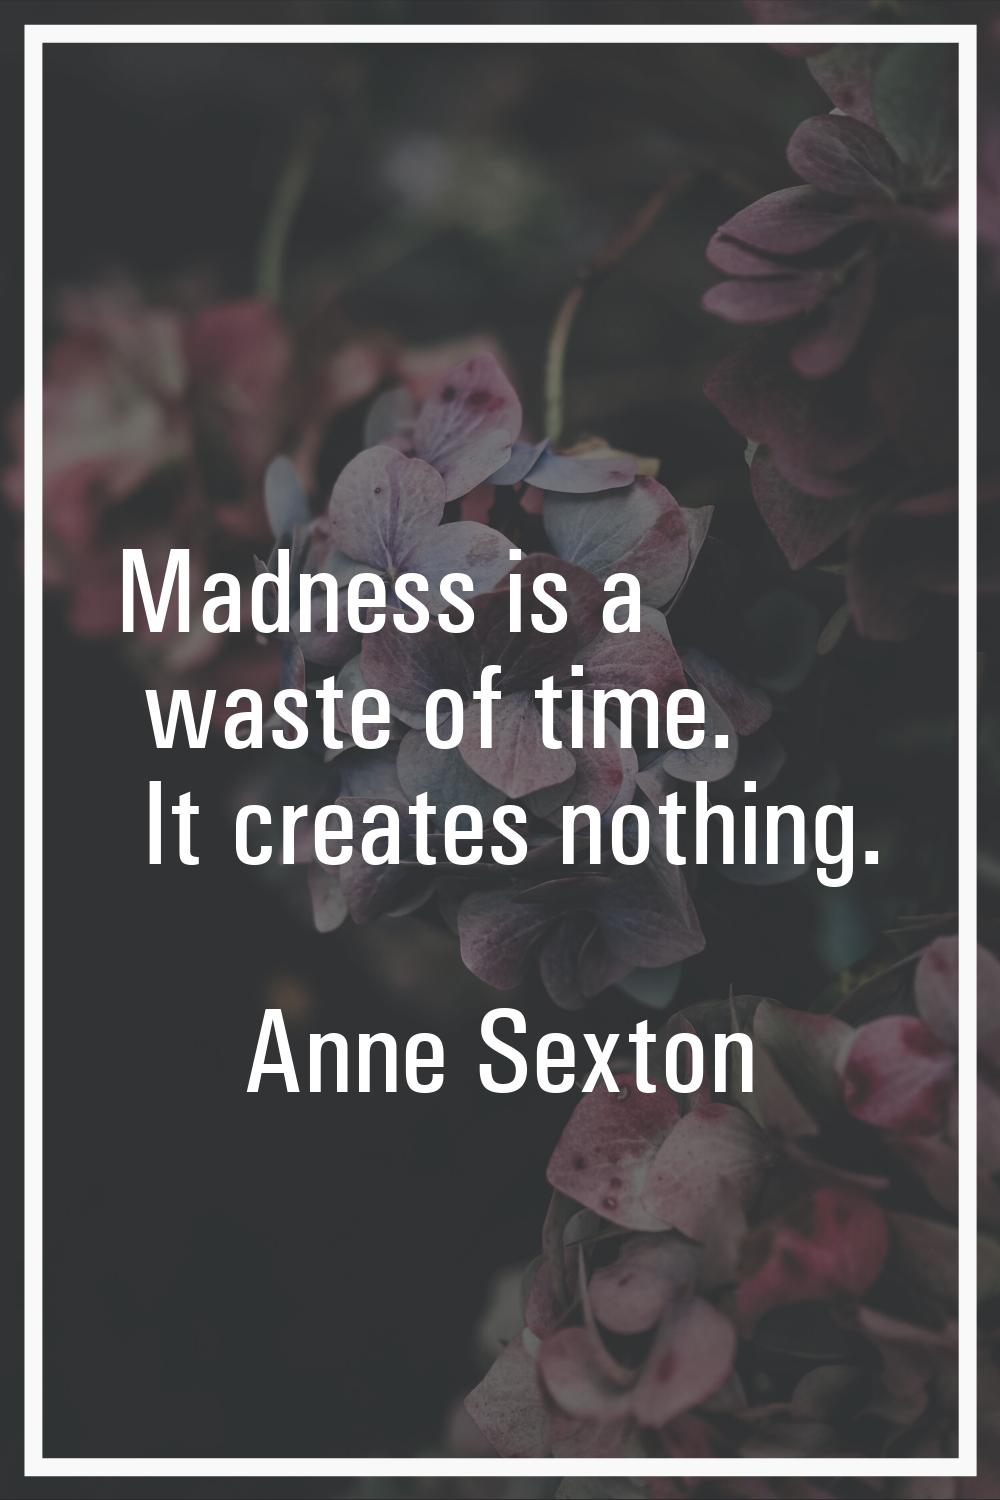 Madness is a waste of time. It creates nothing.